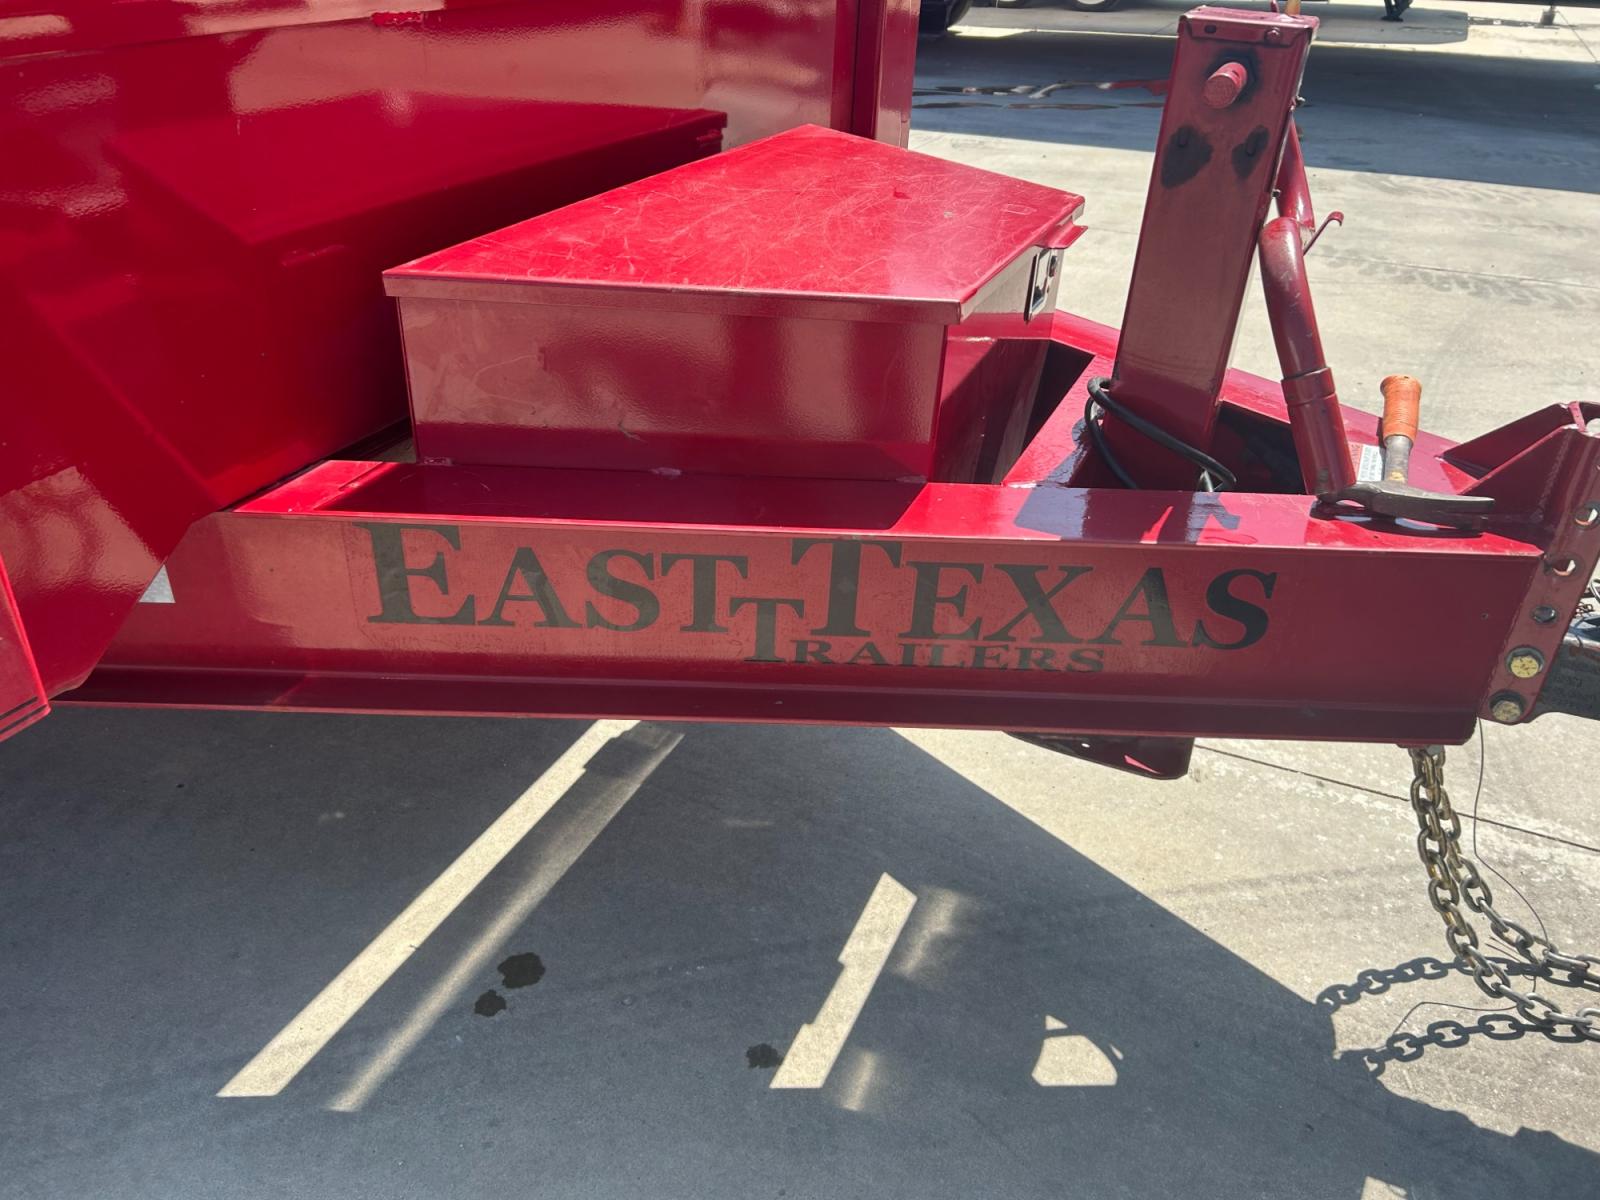 2022 RED EAST TEXAS TRAILER DUMPBED (58SBD1420NE) , located at 17760 Hwy 62, Morris, OK, 74445, 35.609104, -95.877060 - 2022 SILVERLINE TRAILER 83X14 FEATURES 2 7,000 LB DEXTER SPRING AXLES, 2 ELEC FSA BRAKES, COUPLER 2-5/16" ADJUSTABLE (6 HOLE), DIAMOND PLATE FENDERS, 16" CROSS-MEMBERS, 48" DUMP SIDES, 48" 3 WAY GATE, MESH ROLL TARP SYSTEM, JACK SPRING LOADED DROP LEG, 4 3'' D-RINGS, TOOL BOX IN TONGUE, SCISSOR HOIS - Photo #12